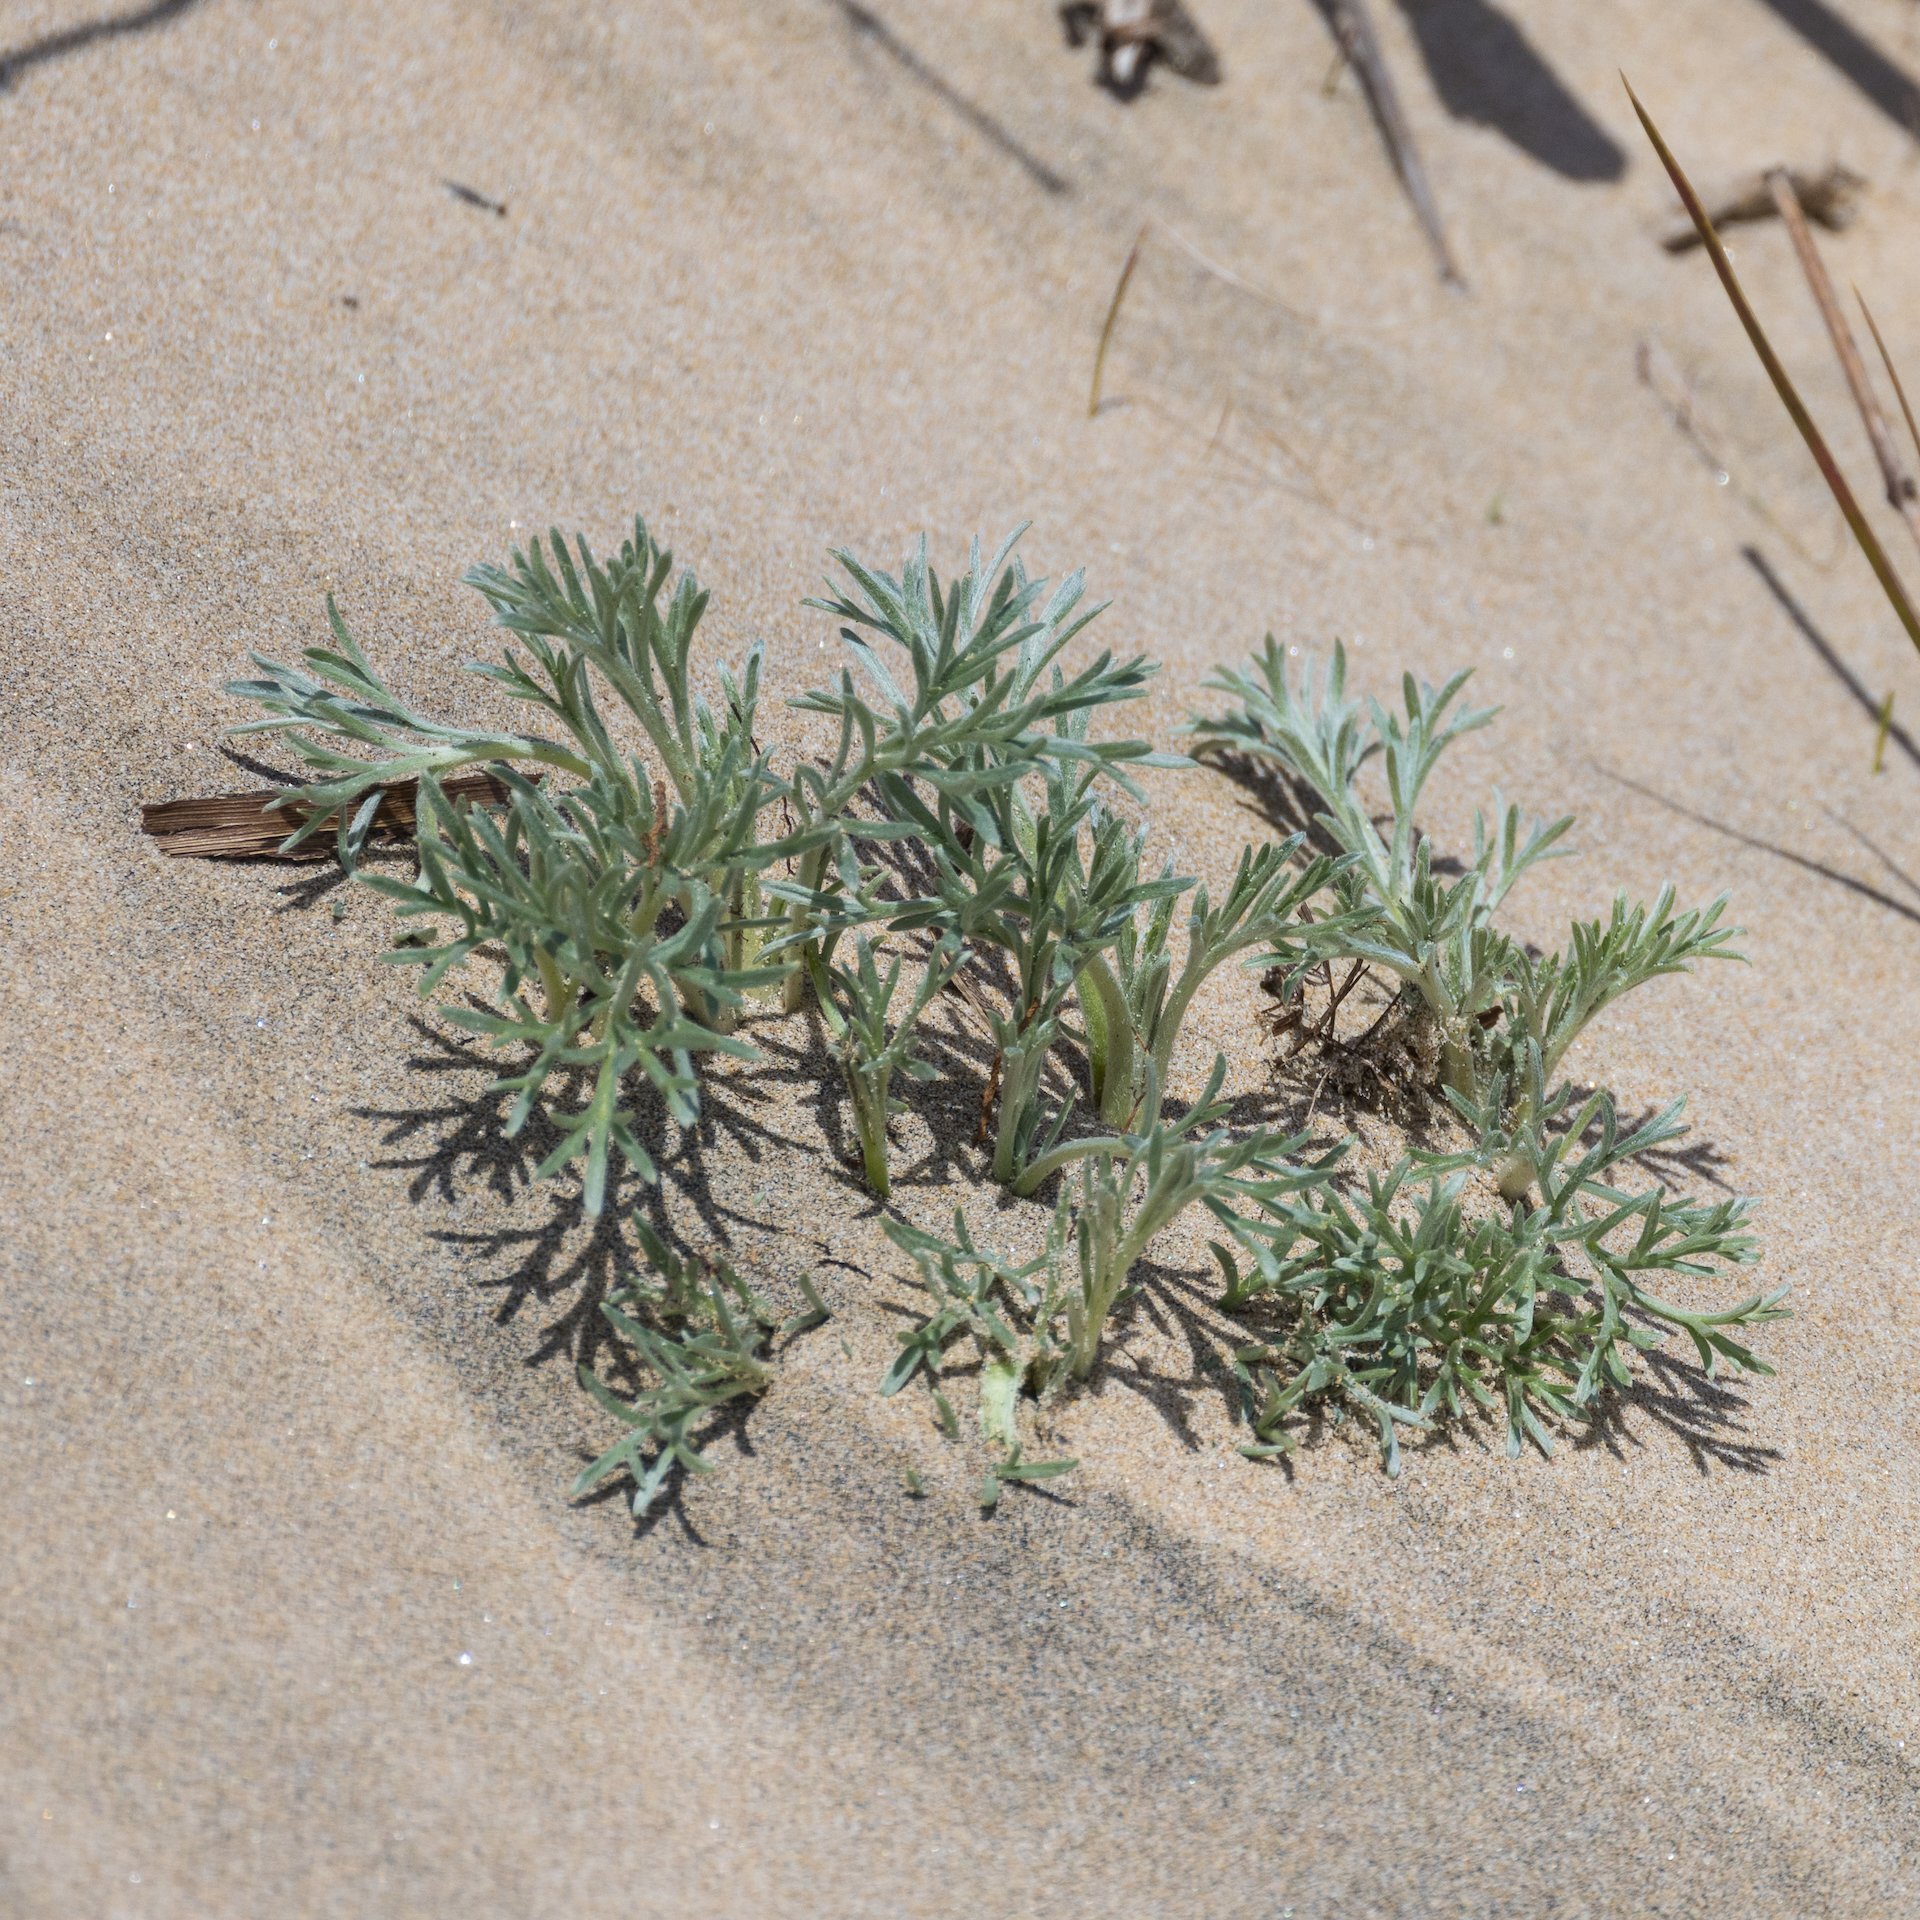  I don’t know what these plants are, but they are very cool and I have to imagine very hardy, surviving in the sand.  